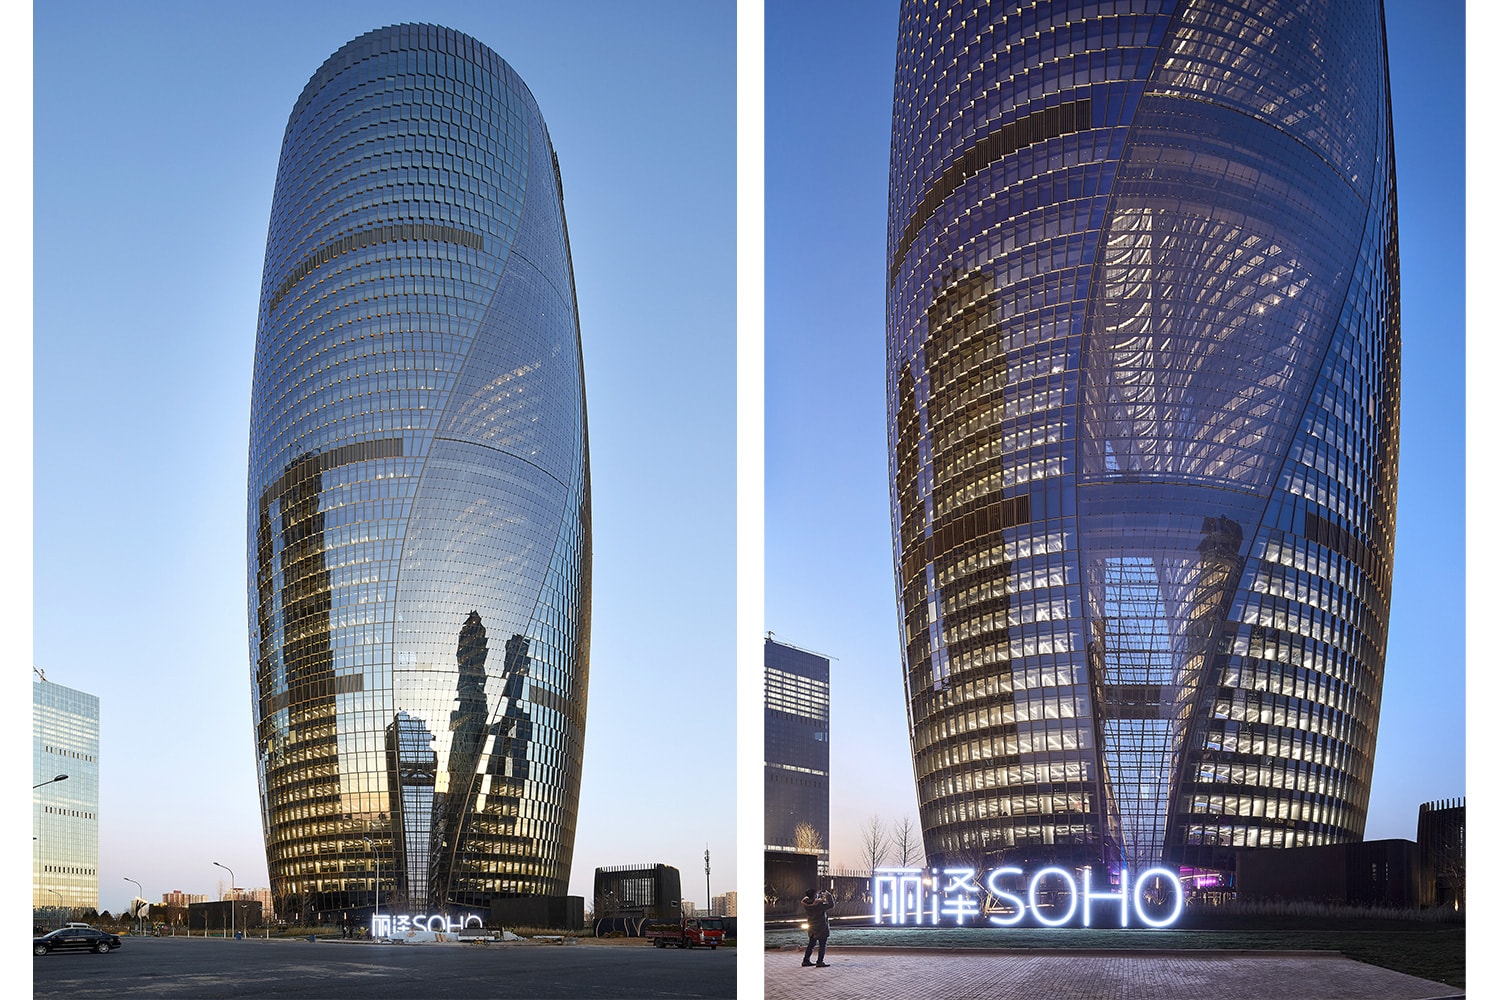 Zaha Hadid Architects Leeza SOHO Opening world's tallest atrium beijing buildings architecture pictures gallery LEED Gold certification 45-story sustainability environment pas de deux